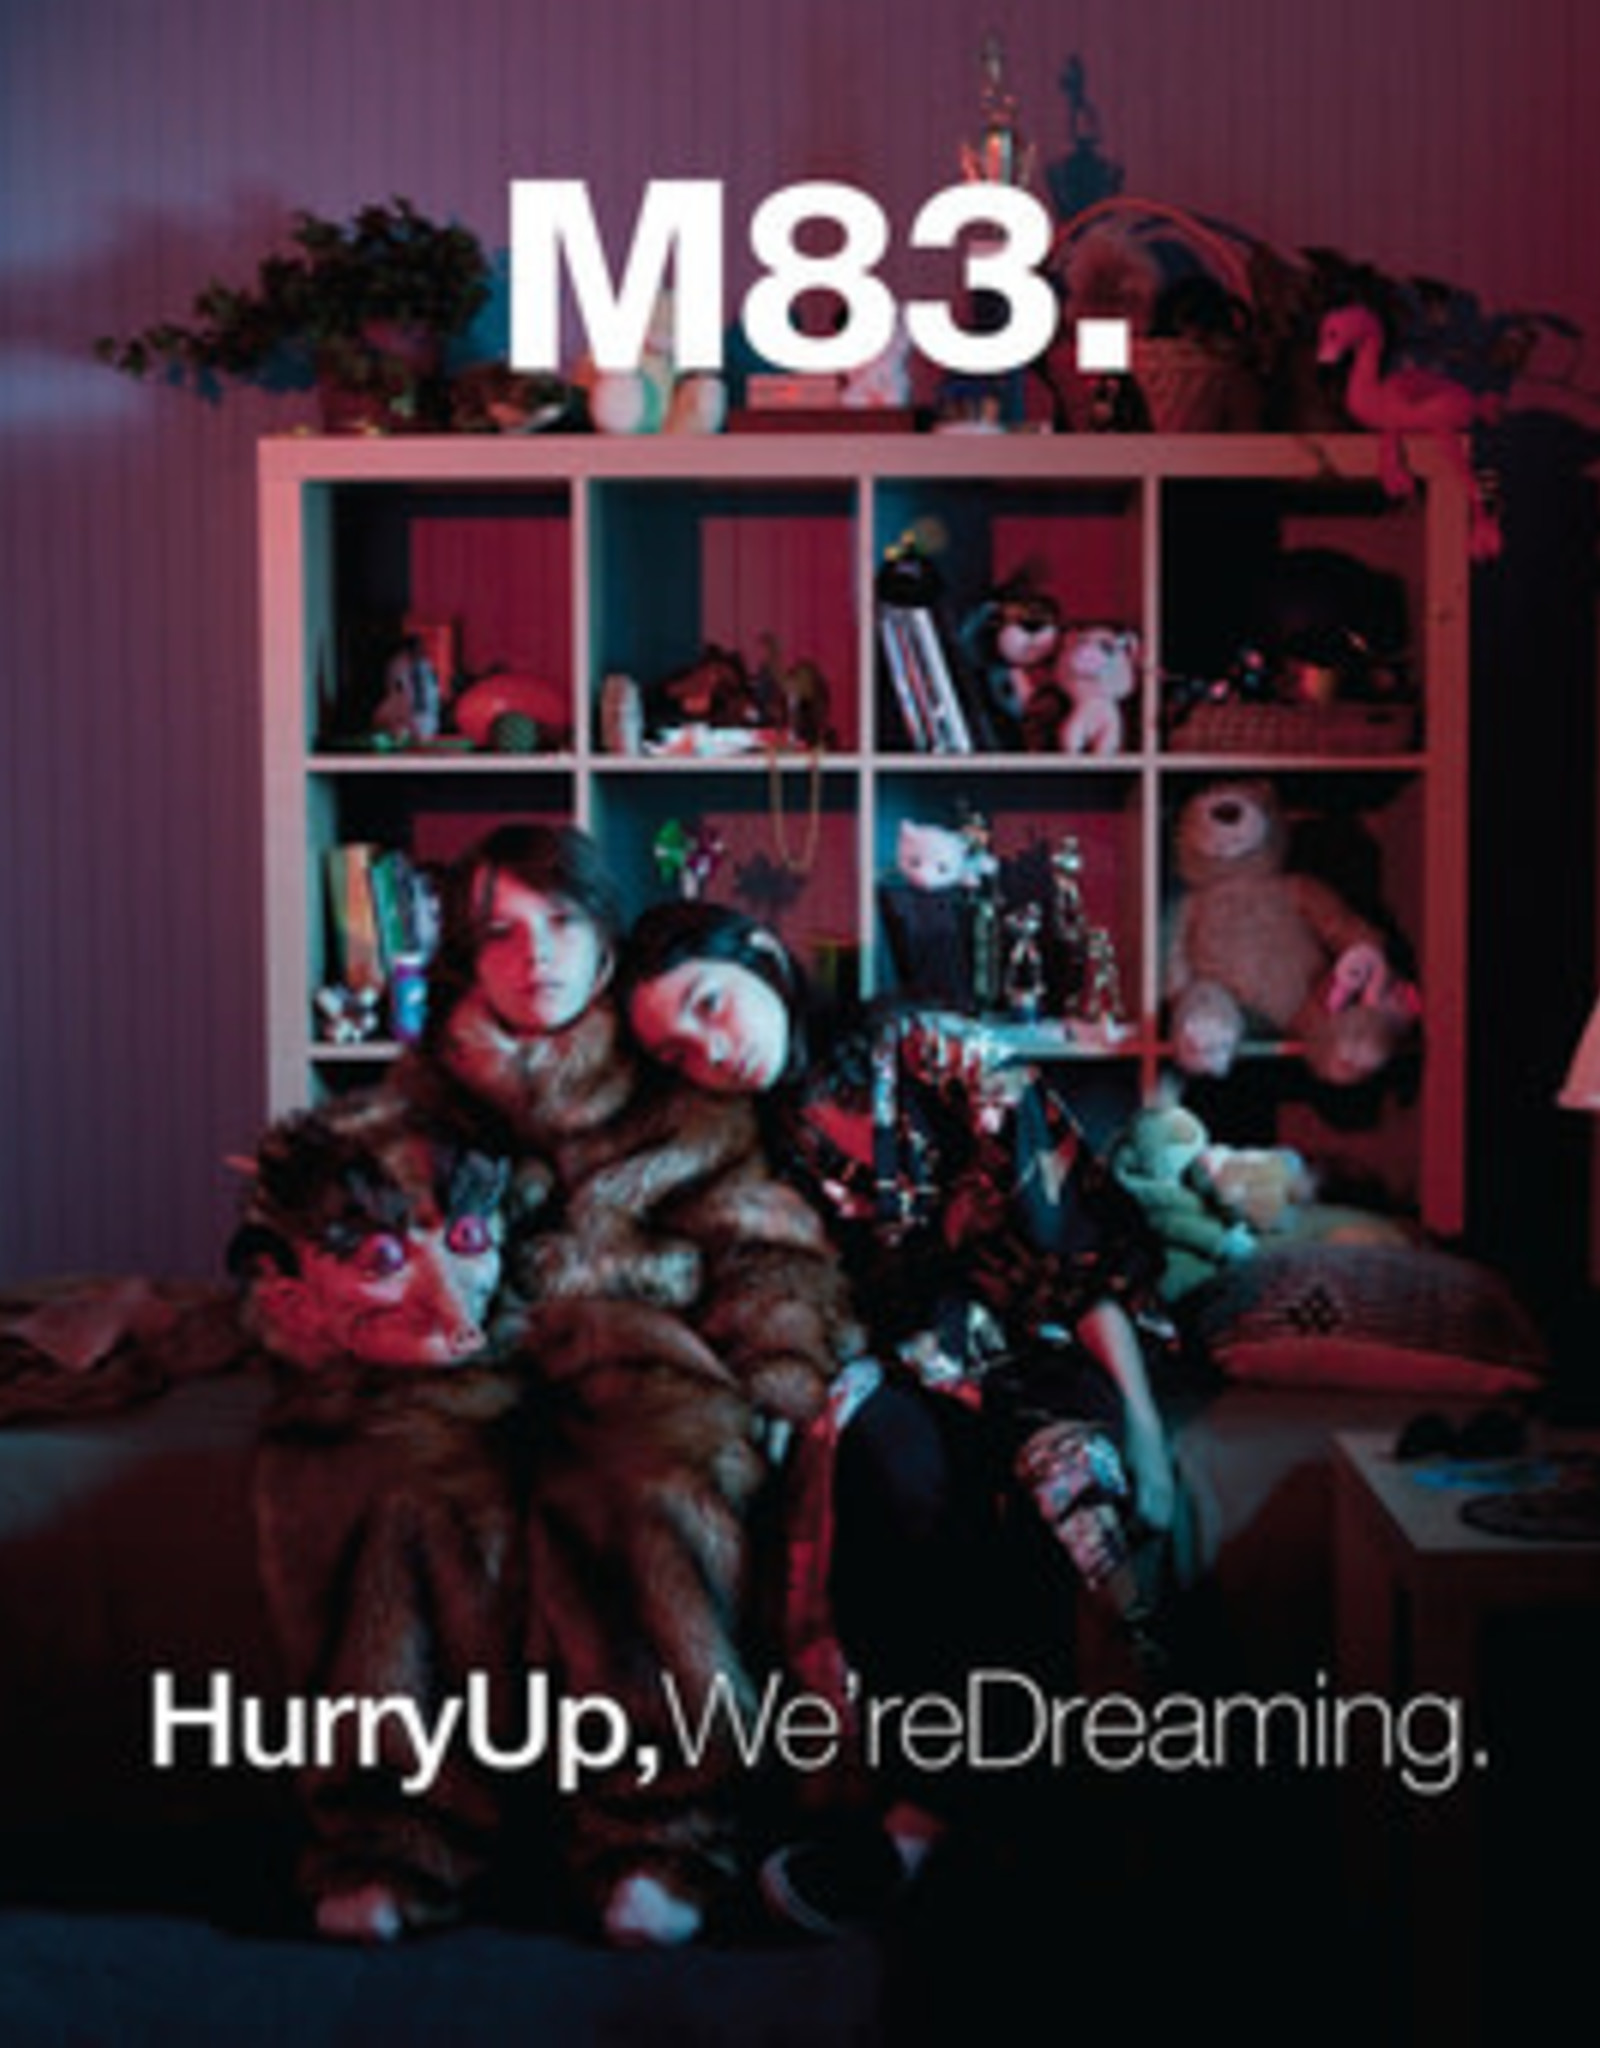 M83 - Hurry Up, We're Dreaming (Blue & Pink Vinyl)